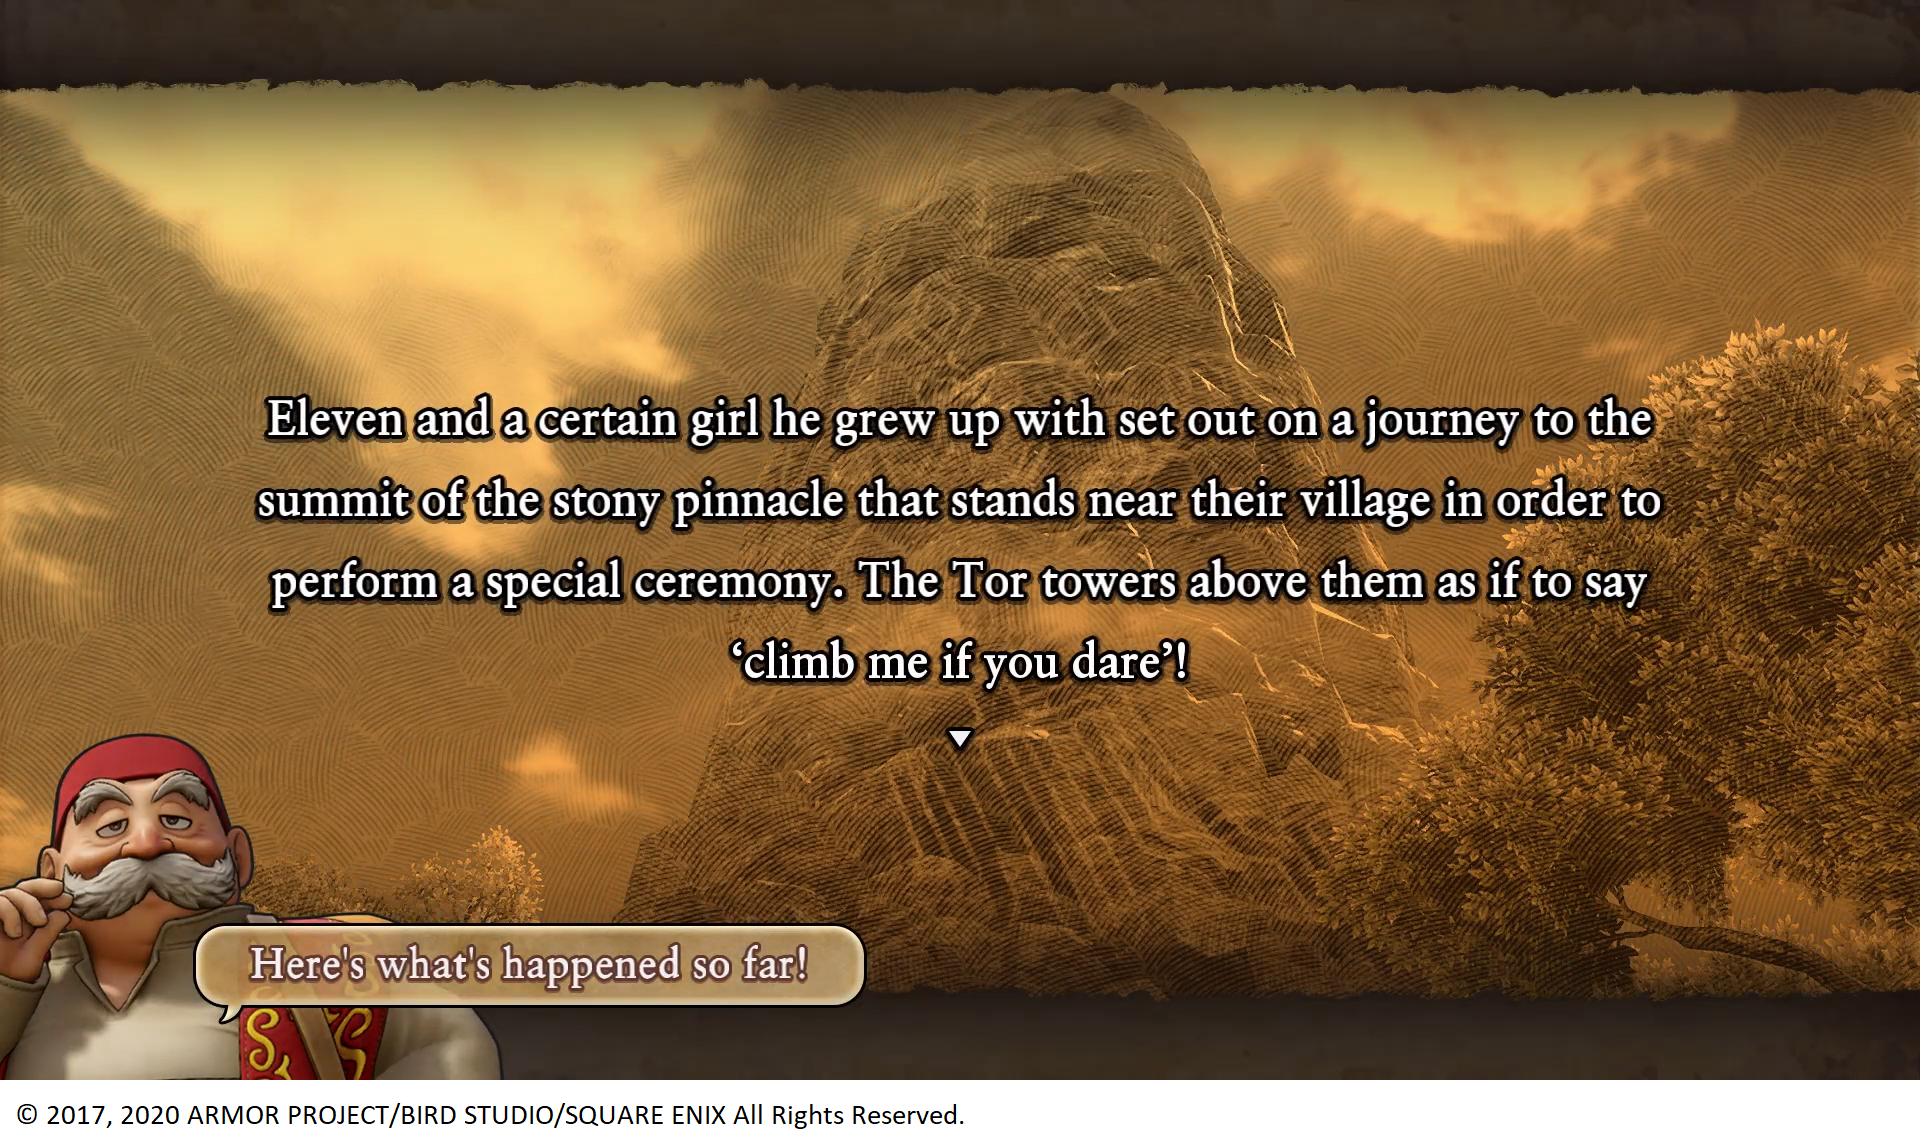 Dragon Quest XI S: Echoes of an Elusive Age screen shot with text reading, "Eleven and a certain girl he grew up with set out on a journey to the summit of the stony pinnacle that stands near their village in order to perform a special ceremony. The Tor towers above them as if to say 'climb me if you dare'! Rab, an elderly white man with big grey mustache, is in the lower right hand corner with a speech bubble saying "Here's what's happened so far!" Copyright on the bottom says "2017, 2020 Armor Project / Bird Studio / Square Enix All Rights Reserved.